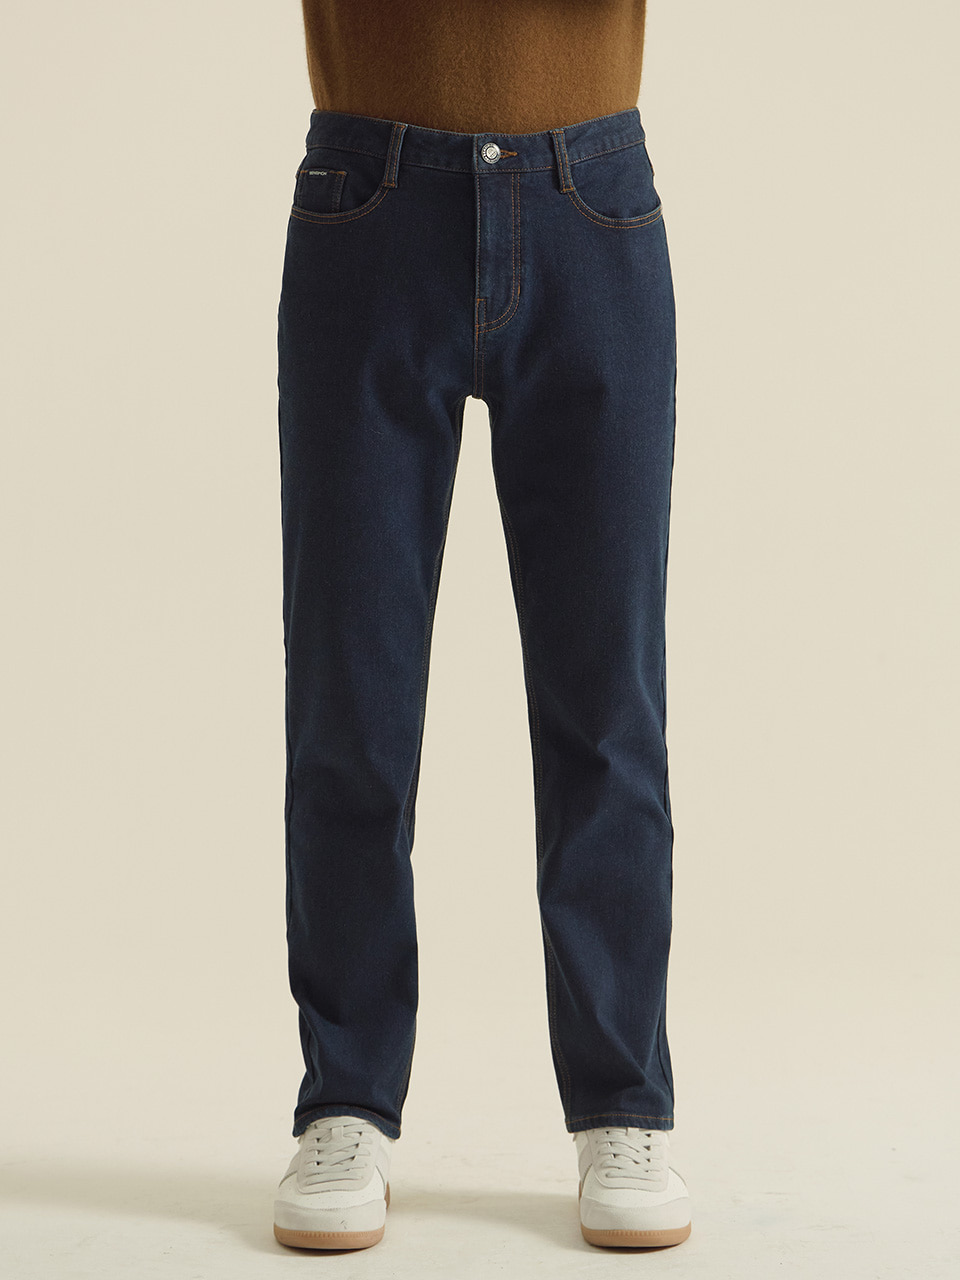 [LIMITED] RELAX-FIT STRETCH NAPPING DENIM PANTS (FOR MAN) - DEEP INDIGO